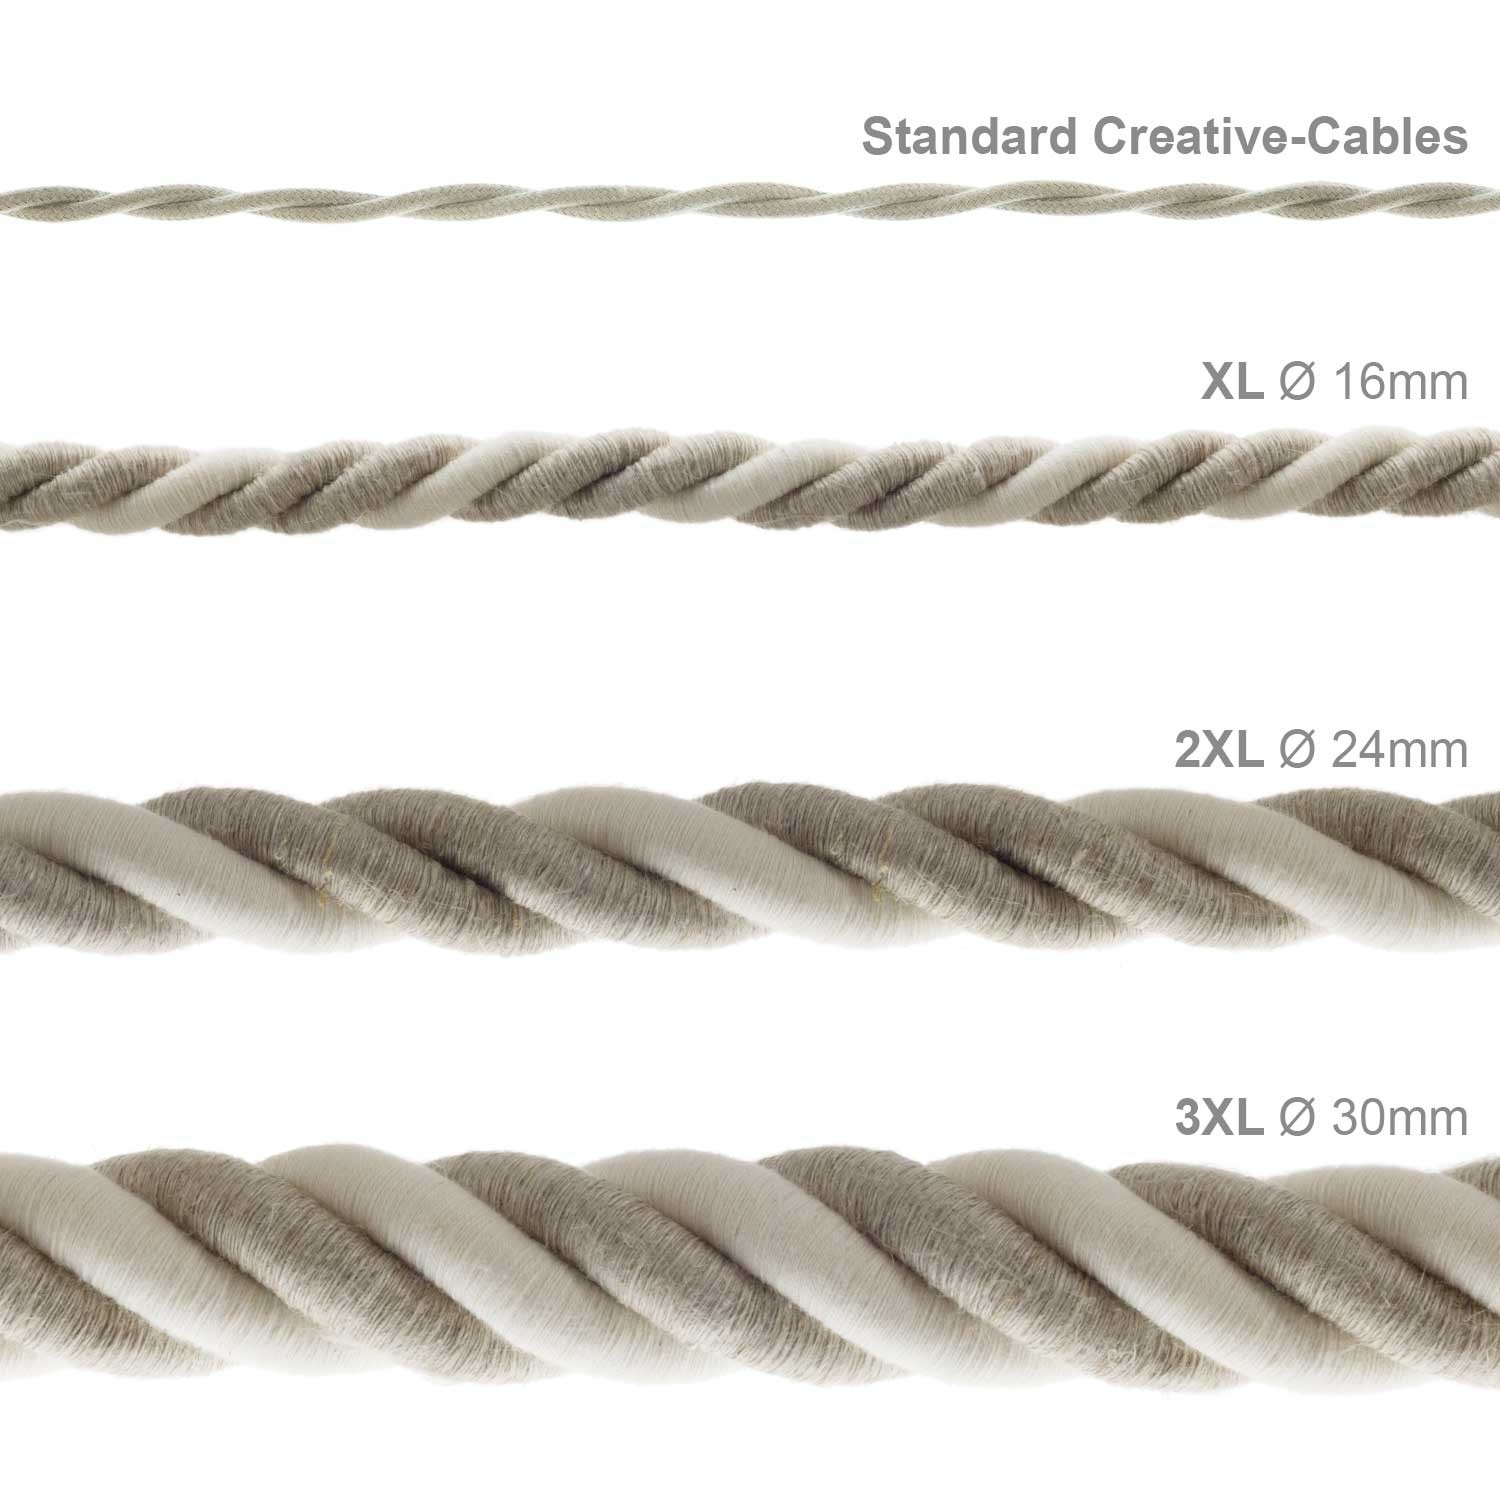 2XL Rope electrical wire 18/3 AWG wire inside. Natural Linen and Raw Cotton Fabric. 24mm.